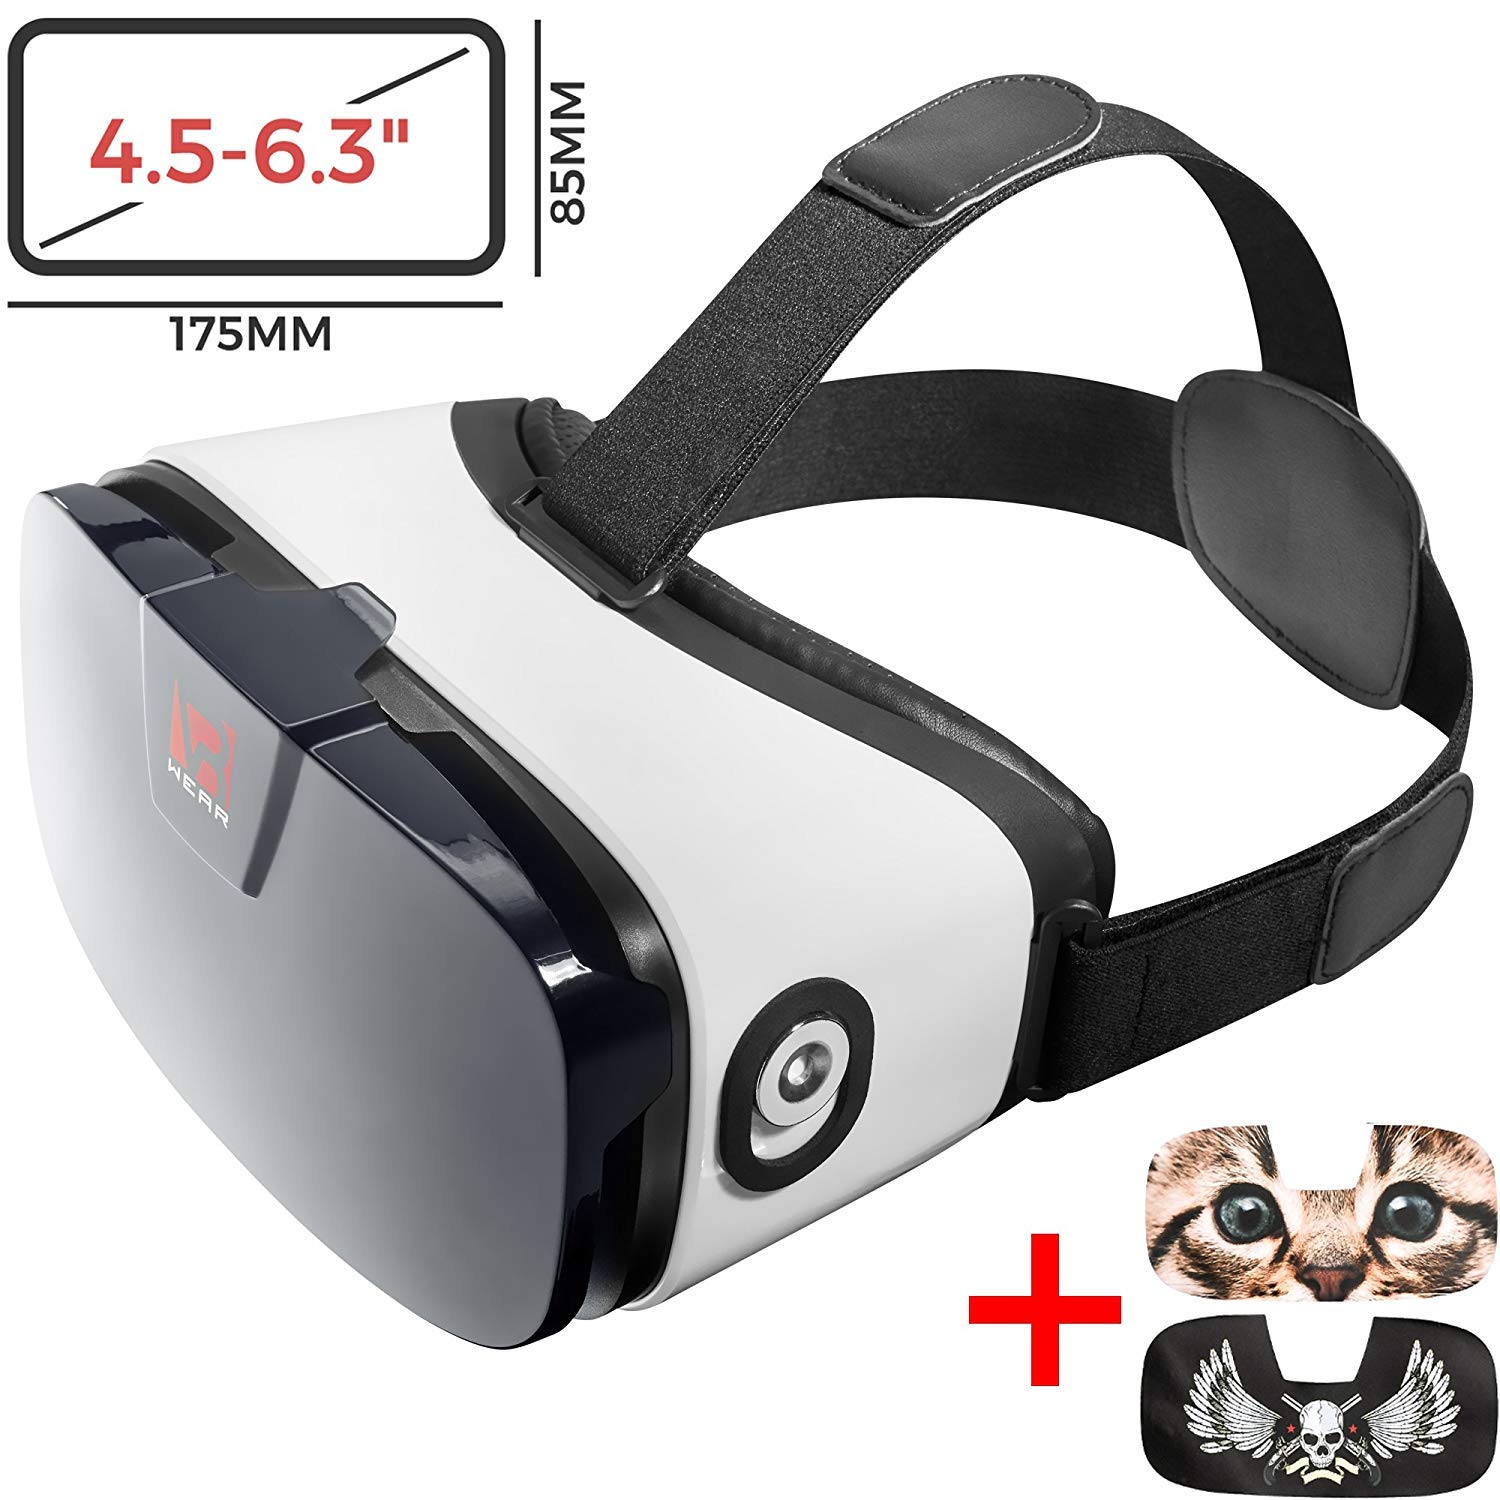 7 Best VR Headsets iPhone |Virtual Reality Headset